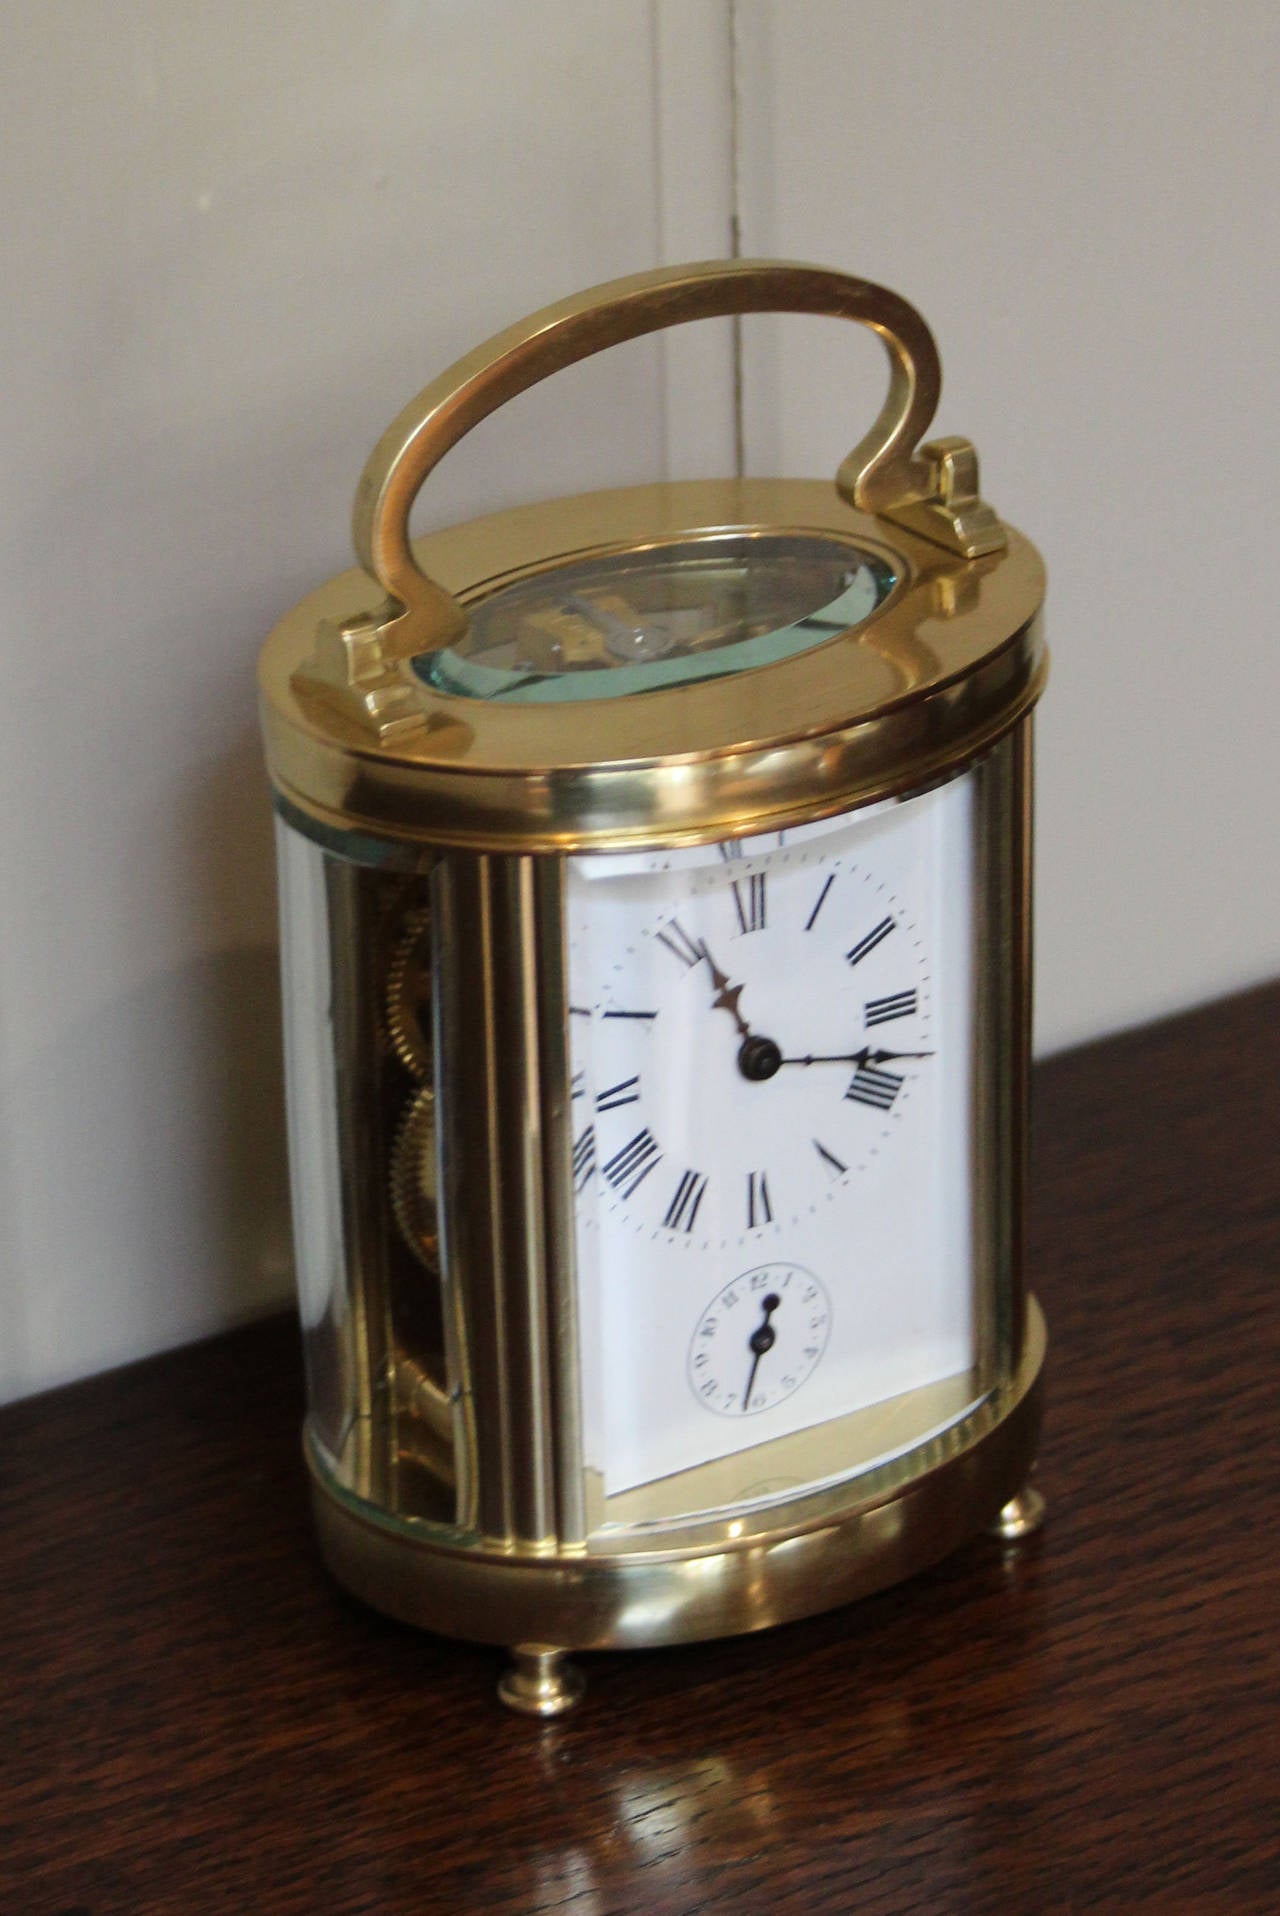 An oval brass carriage clock dating to the end of the 19th Century, which is larger than the standard timepiece models. It has four bevel shaped glasses and a bevel edge oval top glass. The enamel dial has a subsidiary alarm dial. The 8 day movement